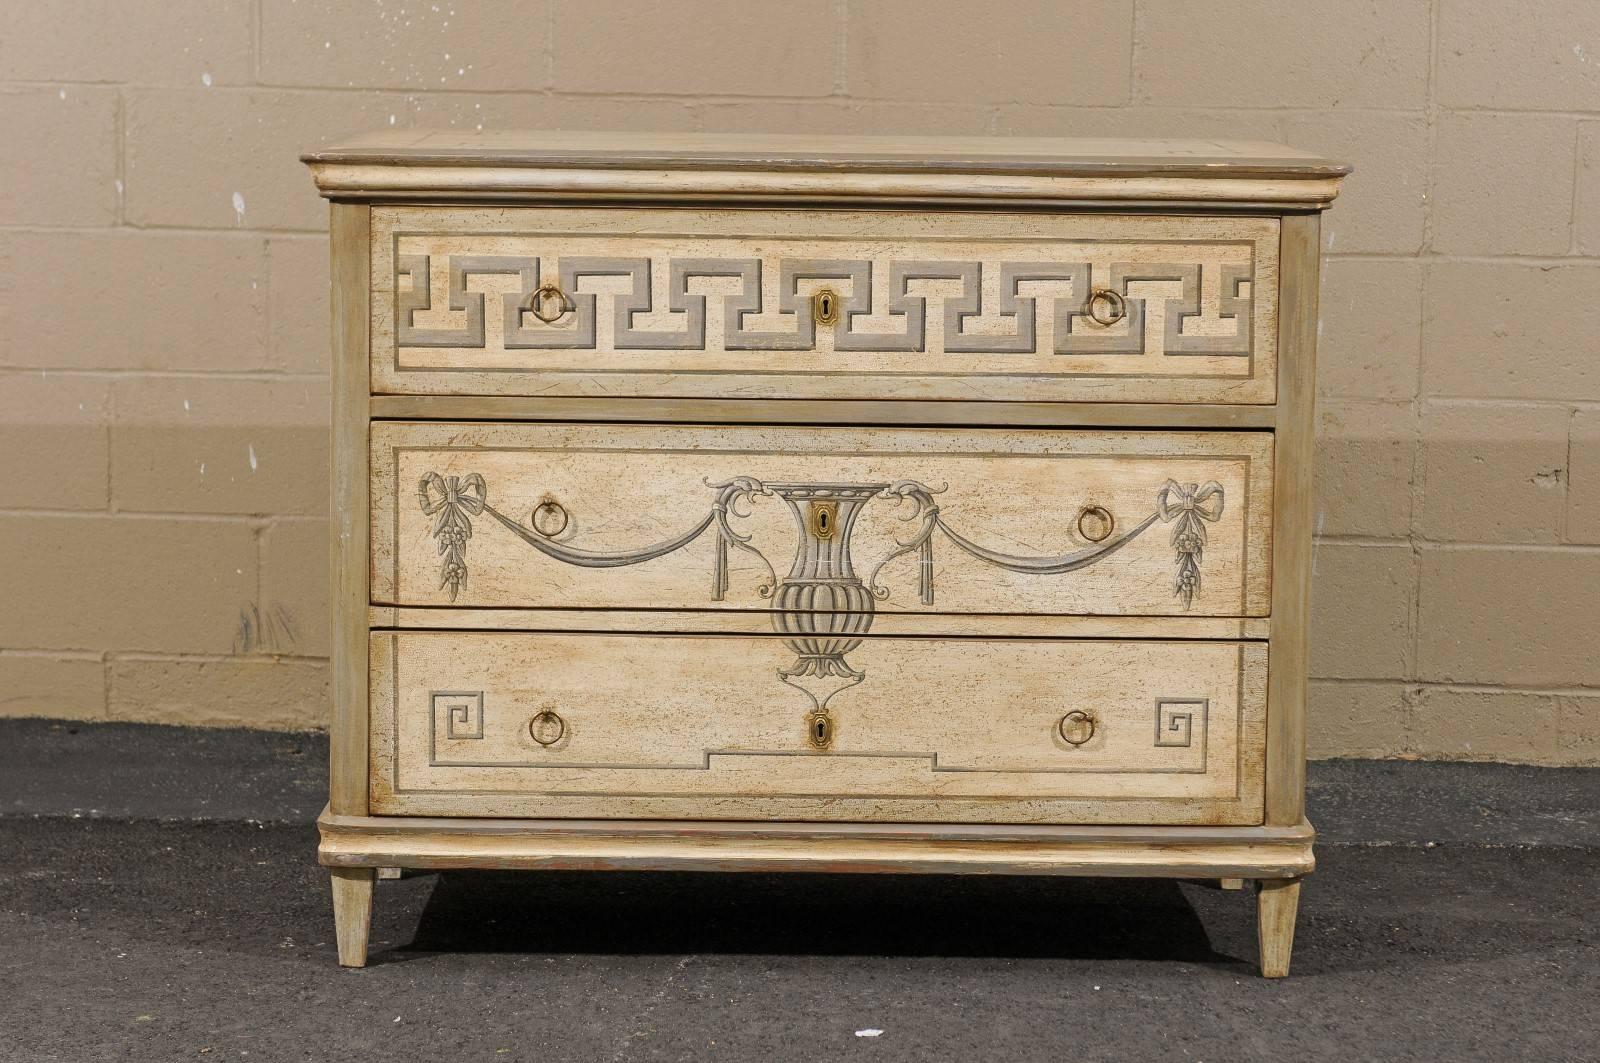 This German neoclassical style painted commode from the mid-19th century features a rectangular top over three beautifully painted drawers. We've been stalking these painted commodes for years and finally took the plunge with this beauty: a pretty